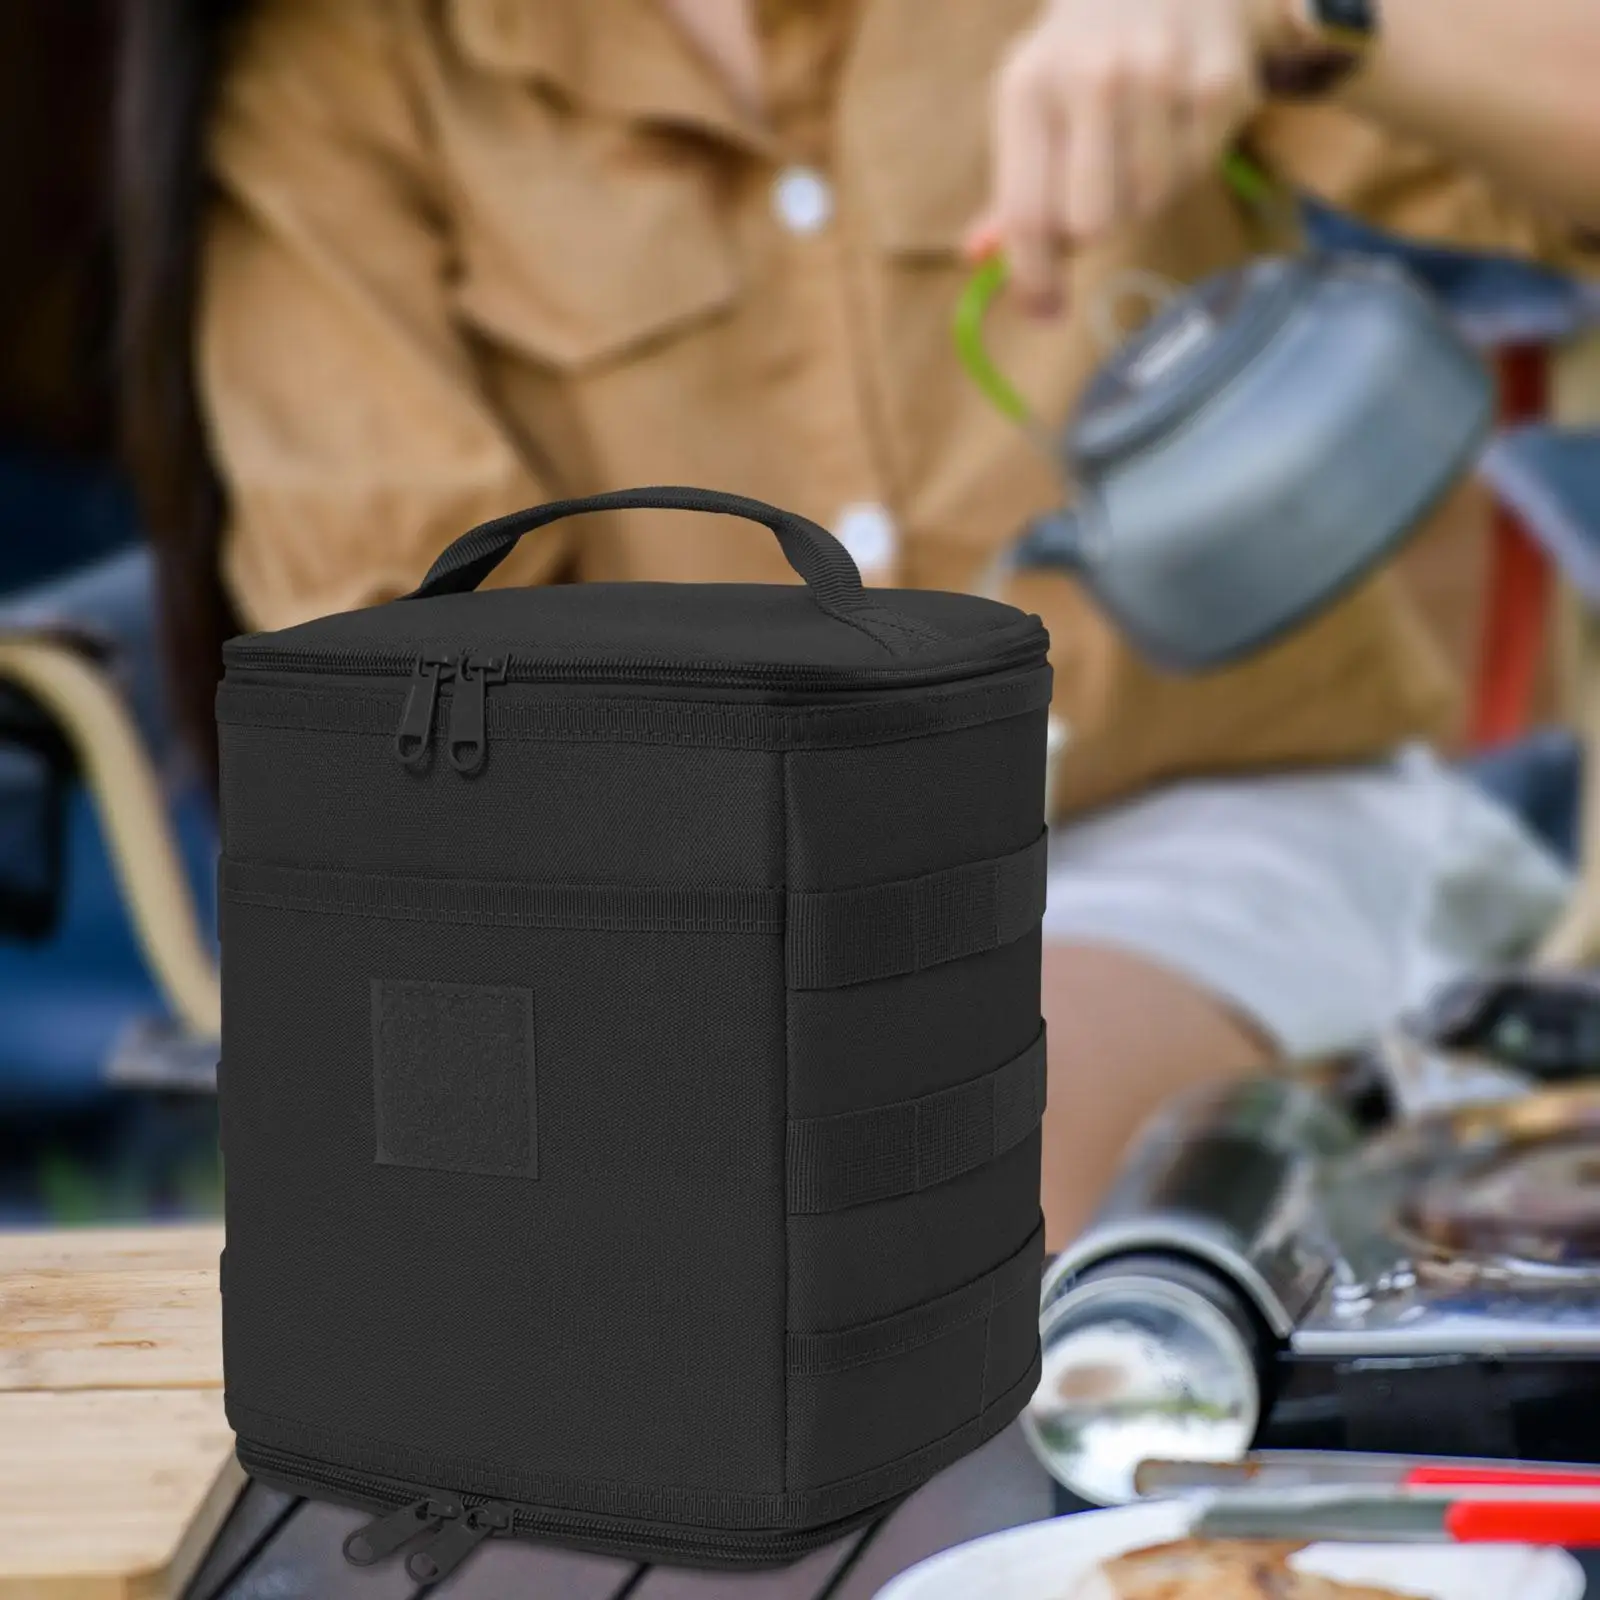 Gas Tank Storage Bag Protective Cover Protector Multifunctional Camping Lantern Bag for Picnic Travel Hiking Cooking Camping